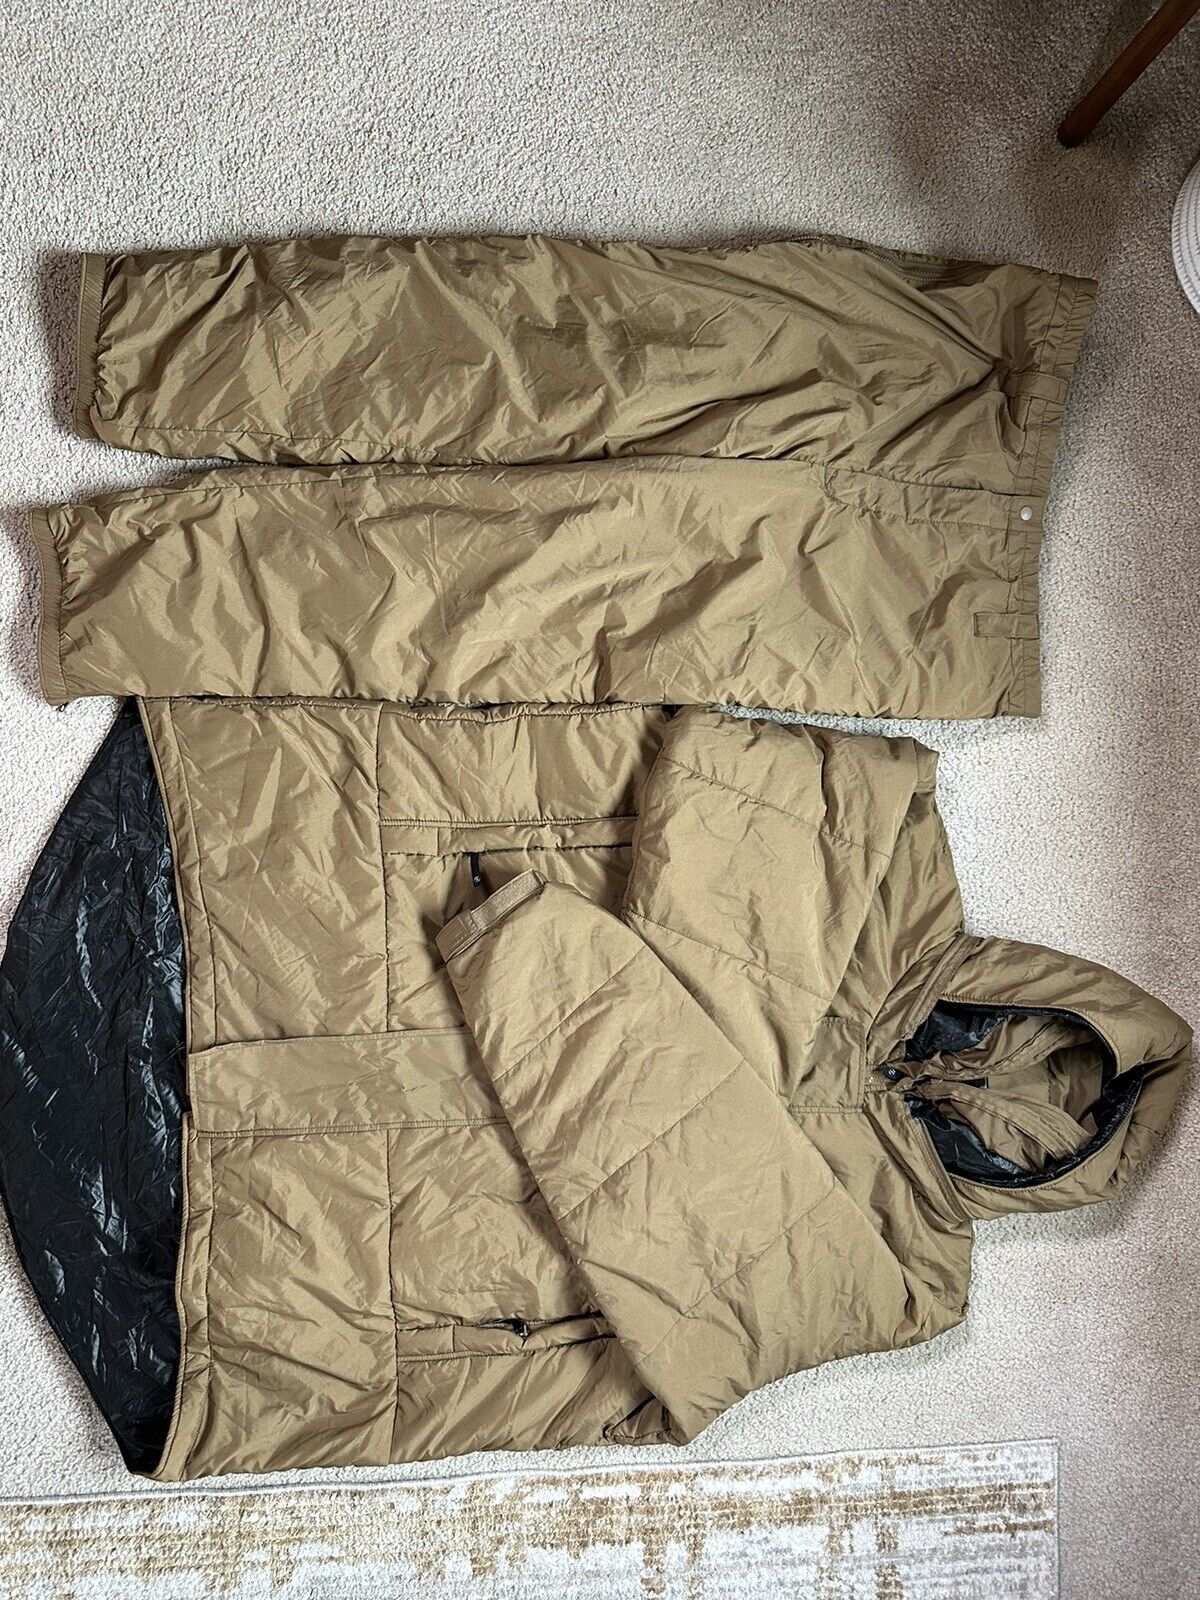 Beyond Clothing L7 Cold Weather Parka and Trousers.